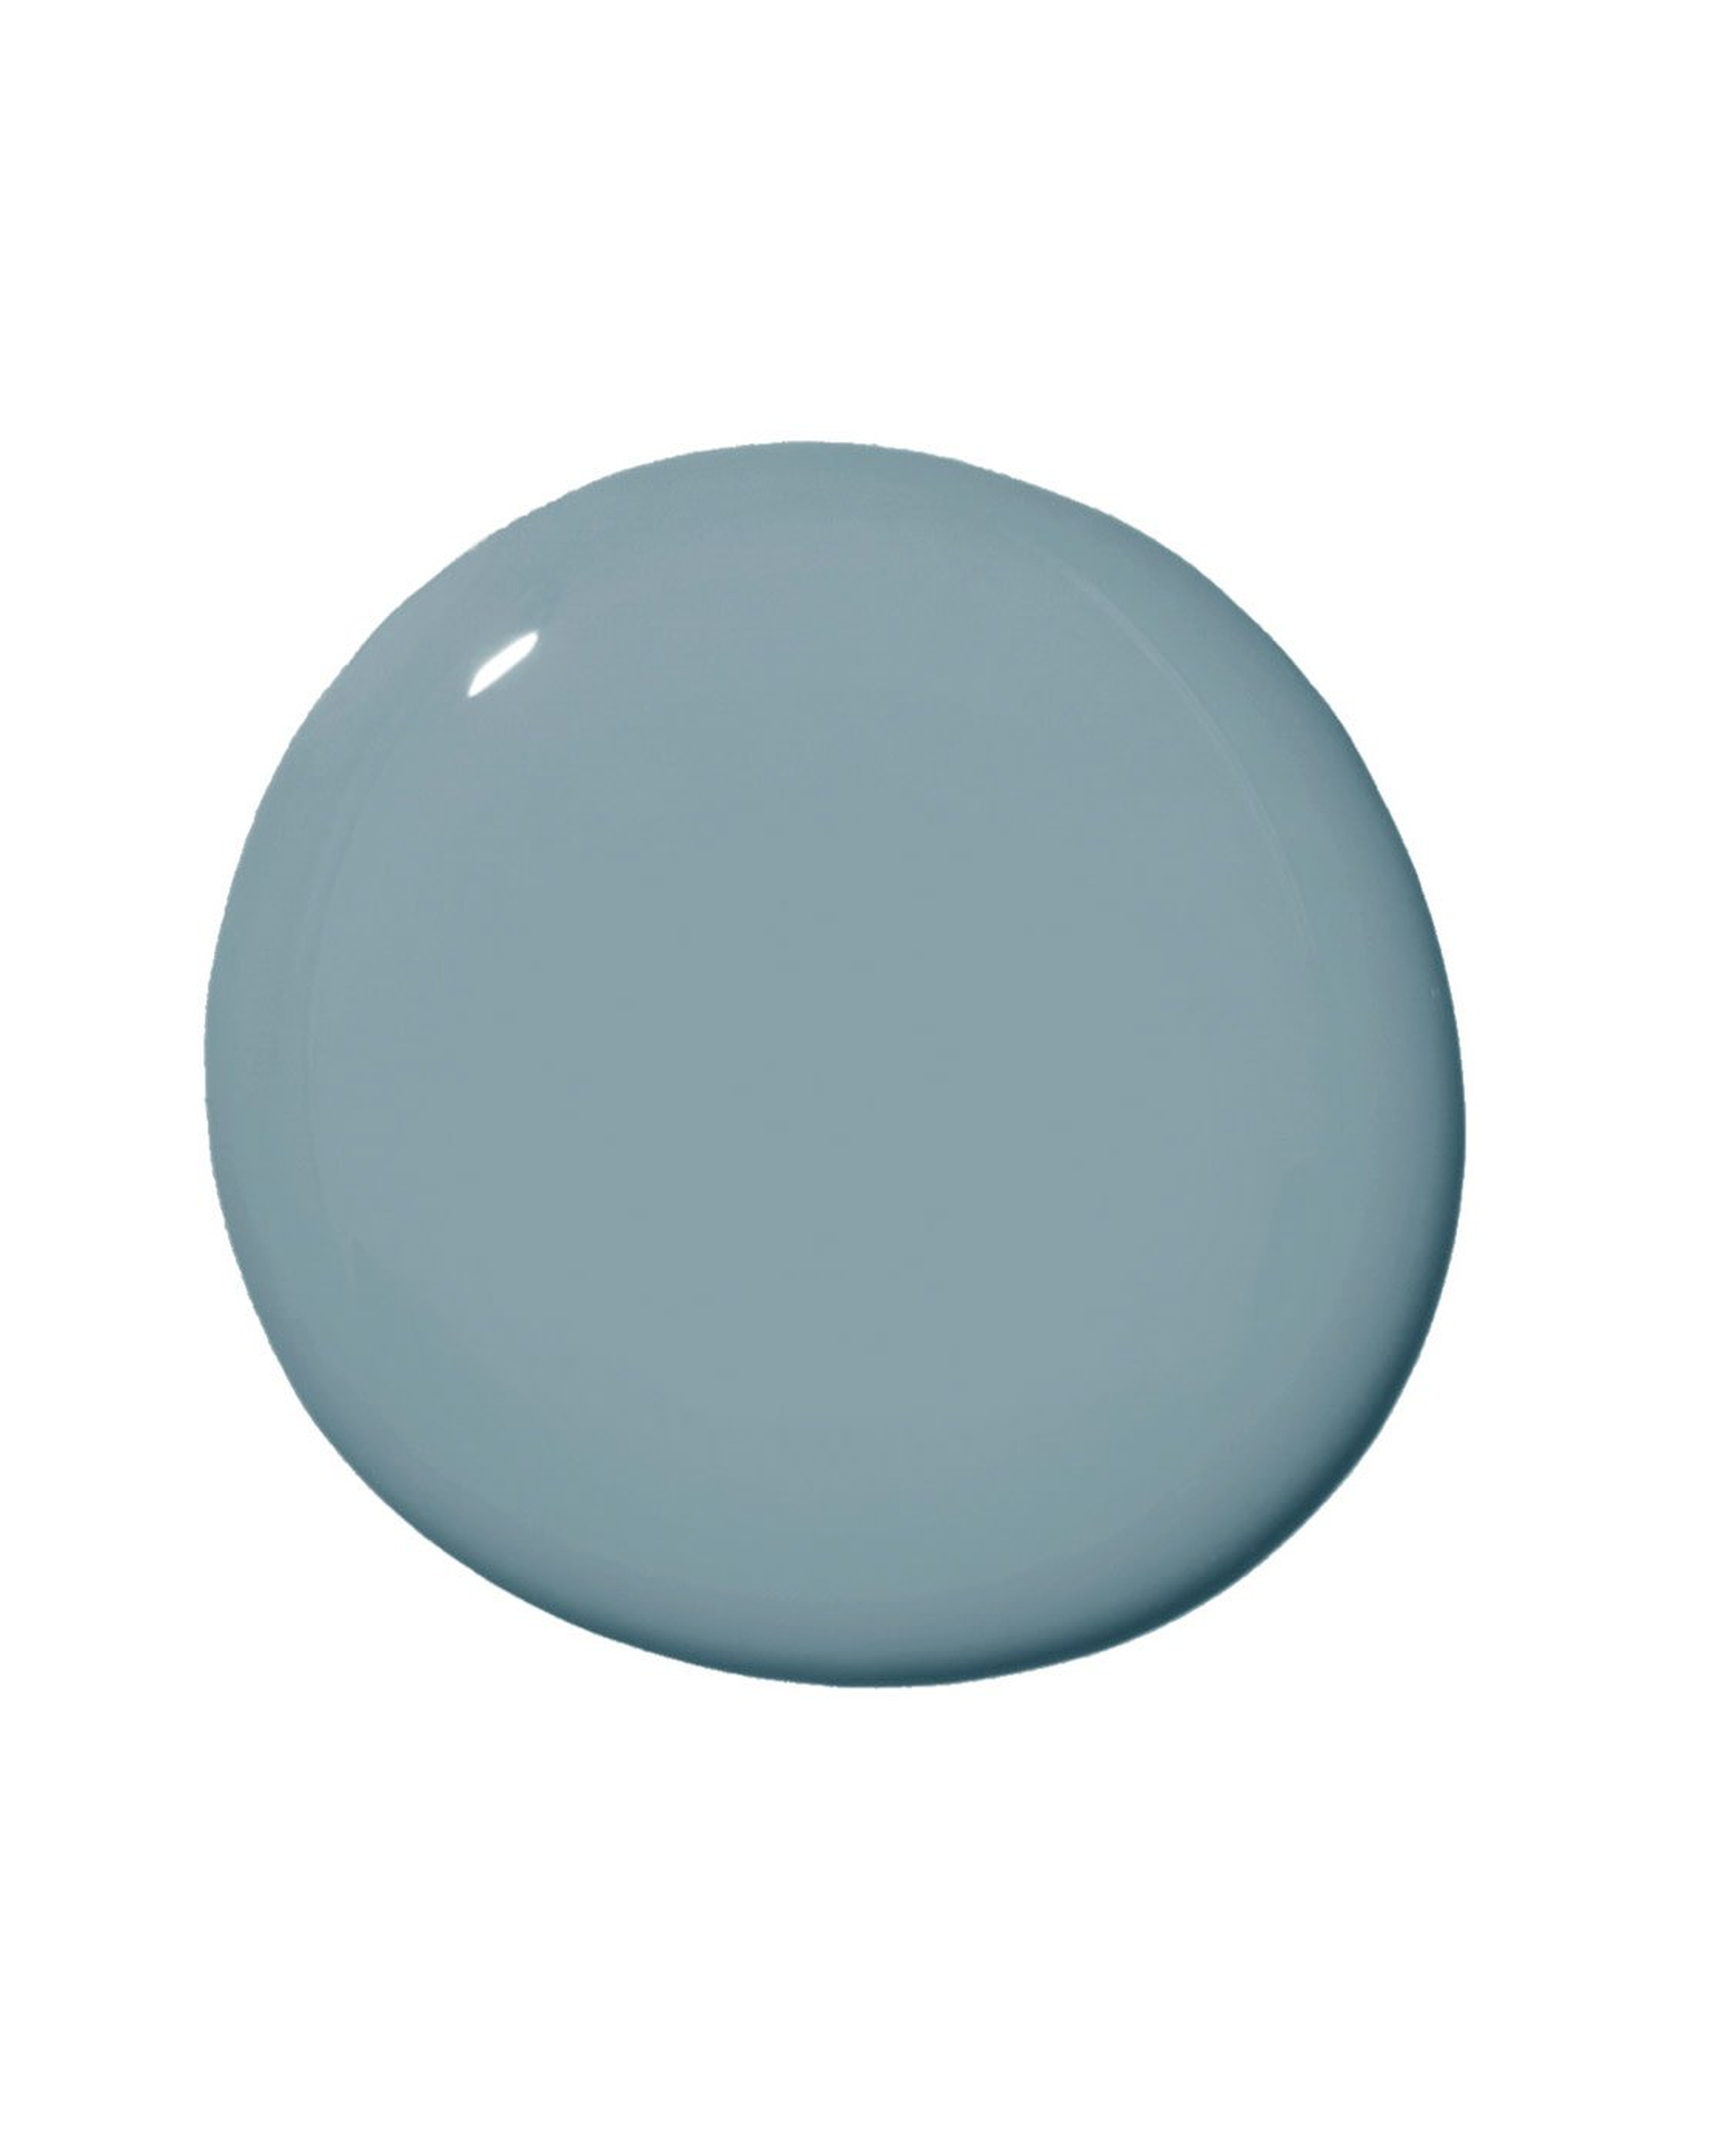 Clare Paint - Good Jeans - Wall Swatch - Clare Paint